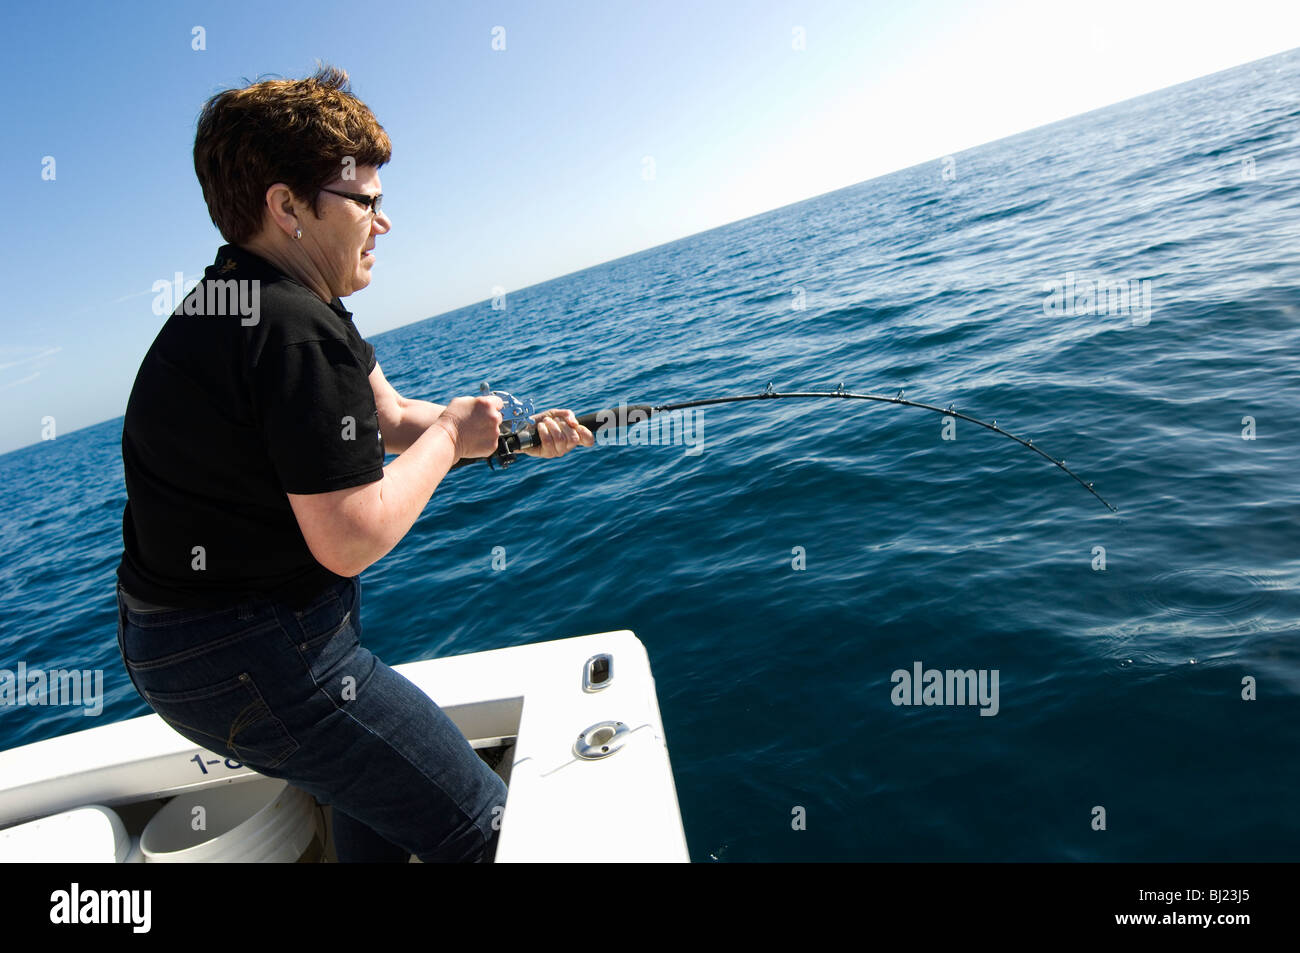 Woman fishing from a boat Stock Photo